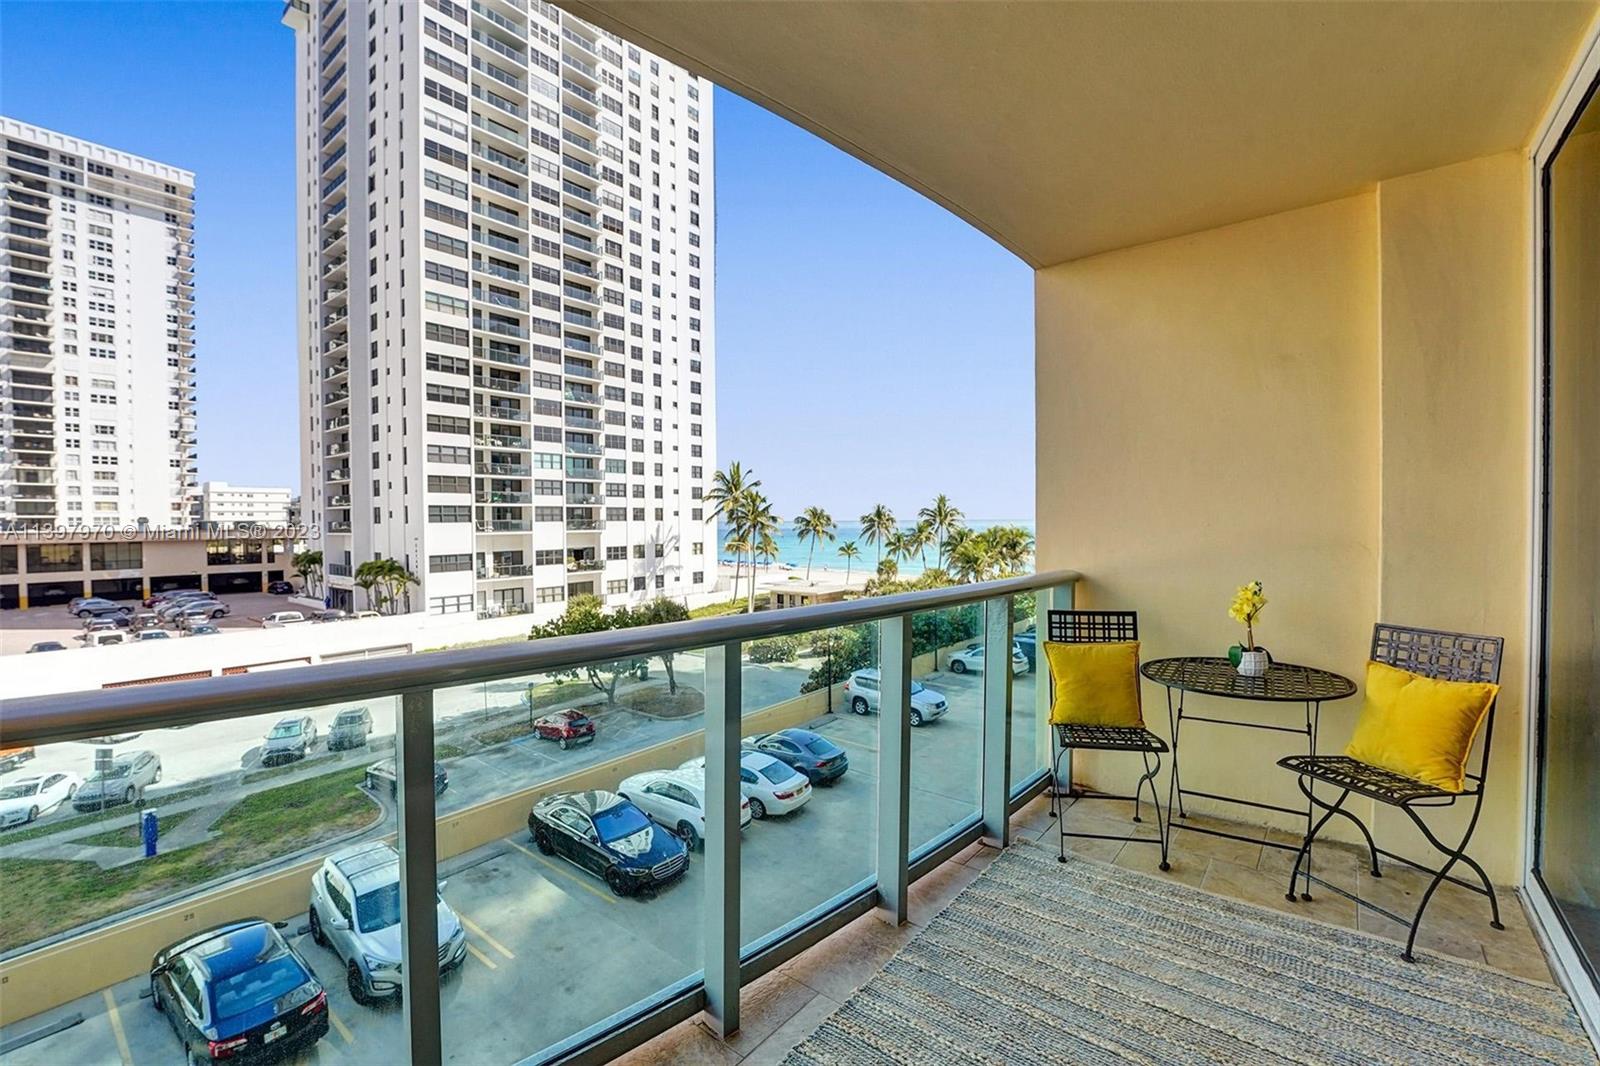 Photo 2 of Wave Condo Apt 401 (available Nov-25) in Hollywood - MLS A11397970